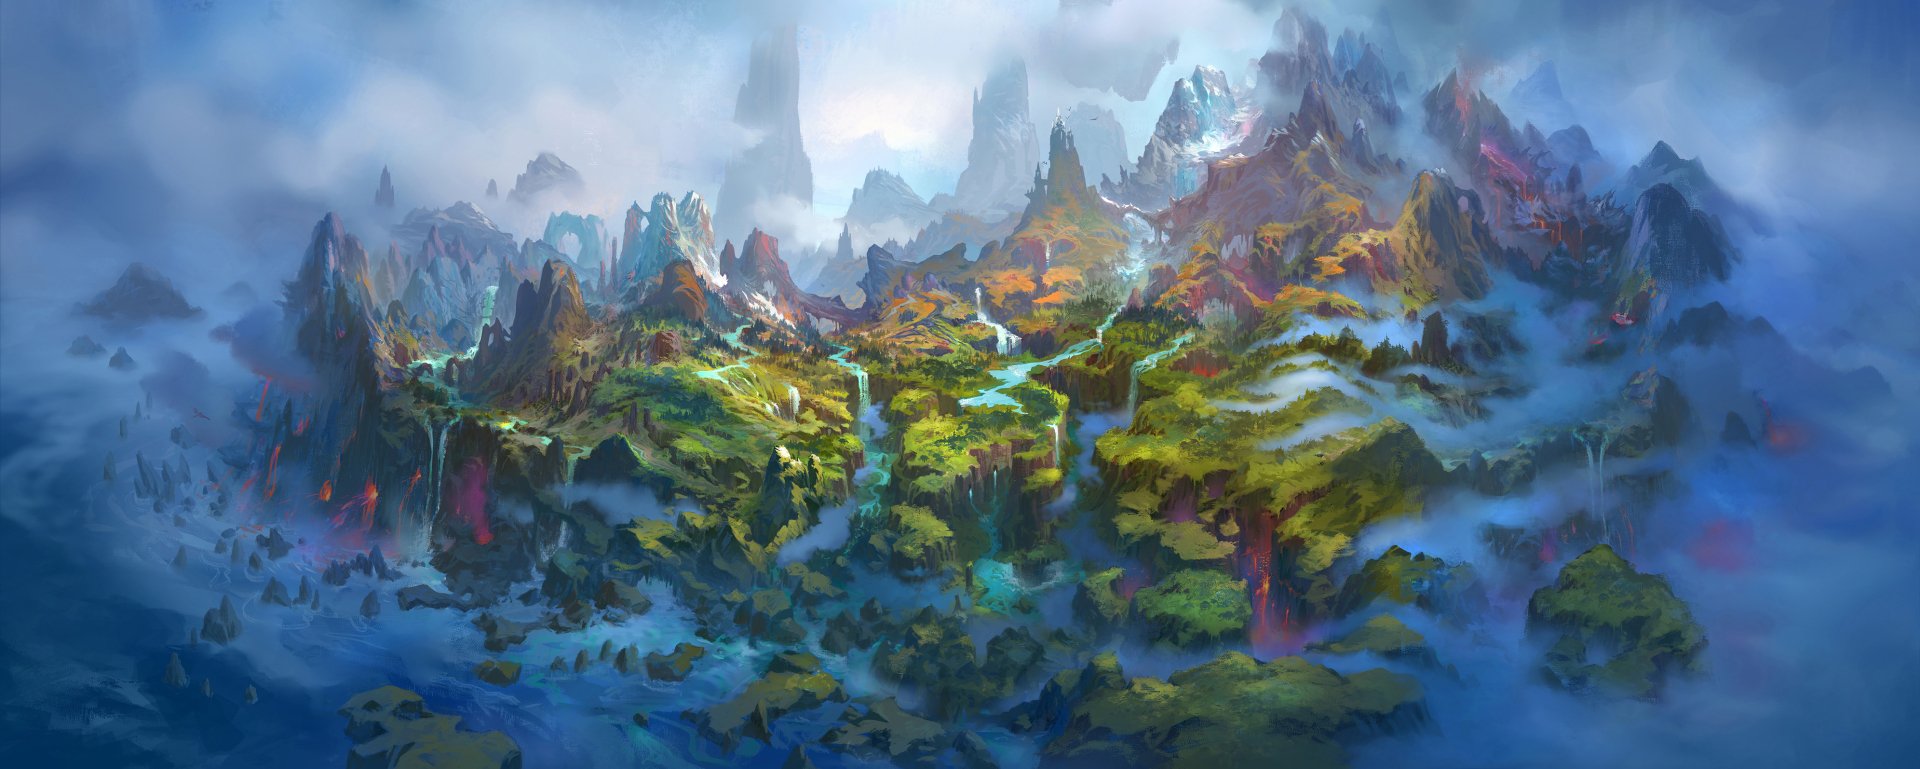 10 World Of Warcraft Dragonflight Hd Wallpapers And Backgrounds